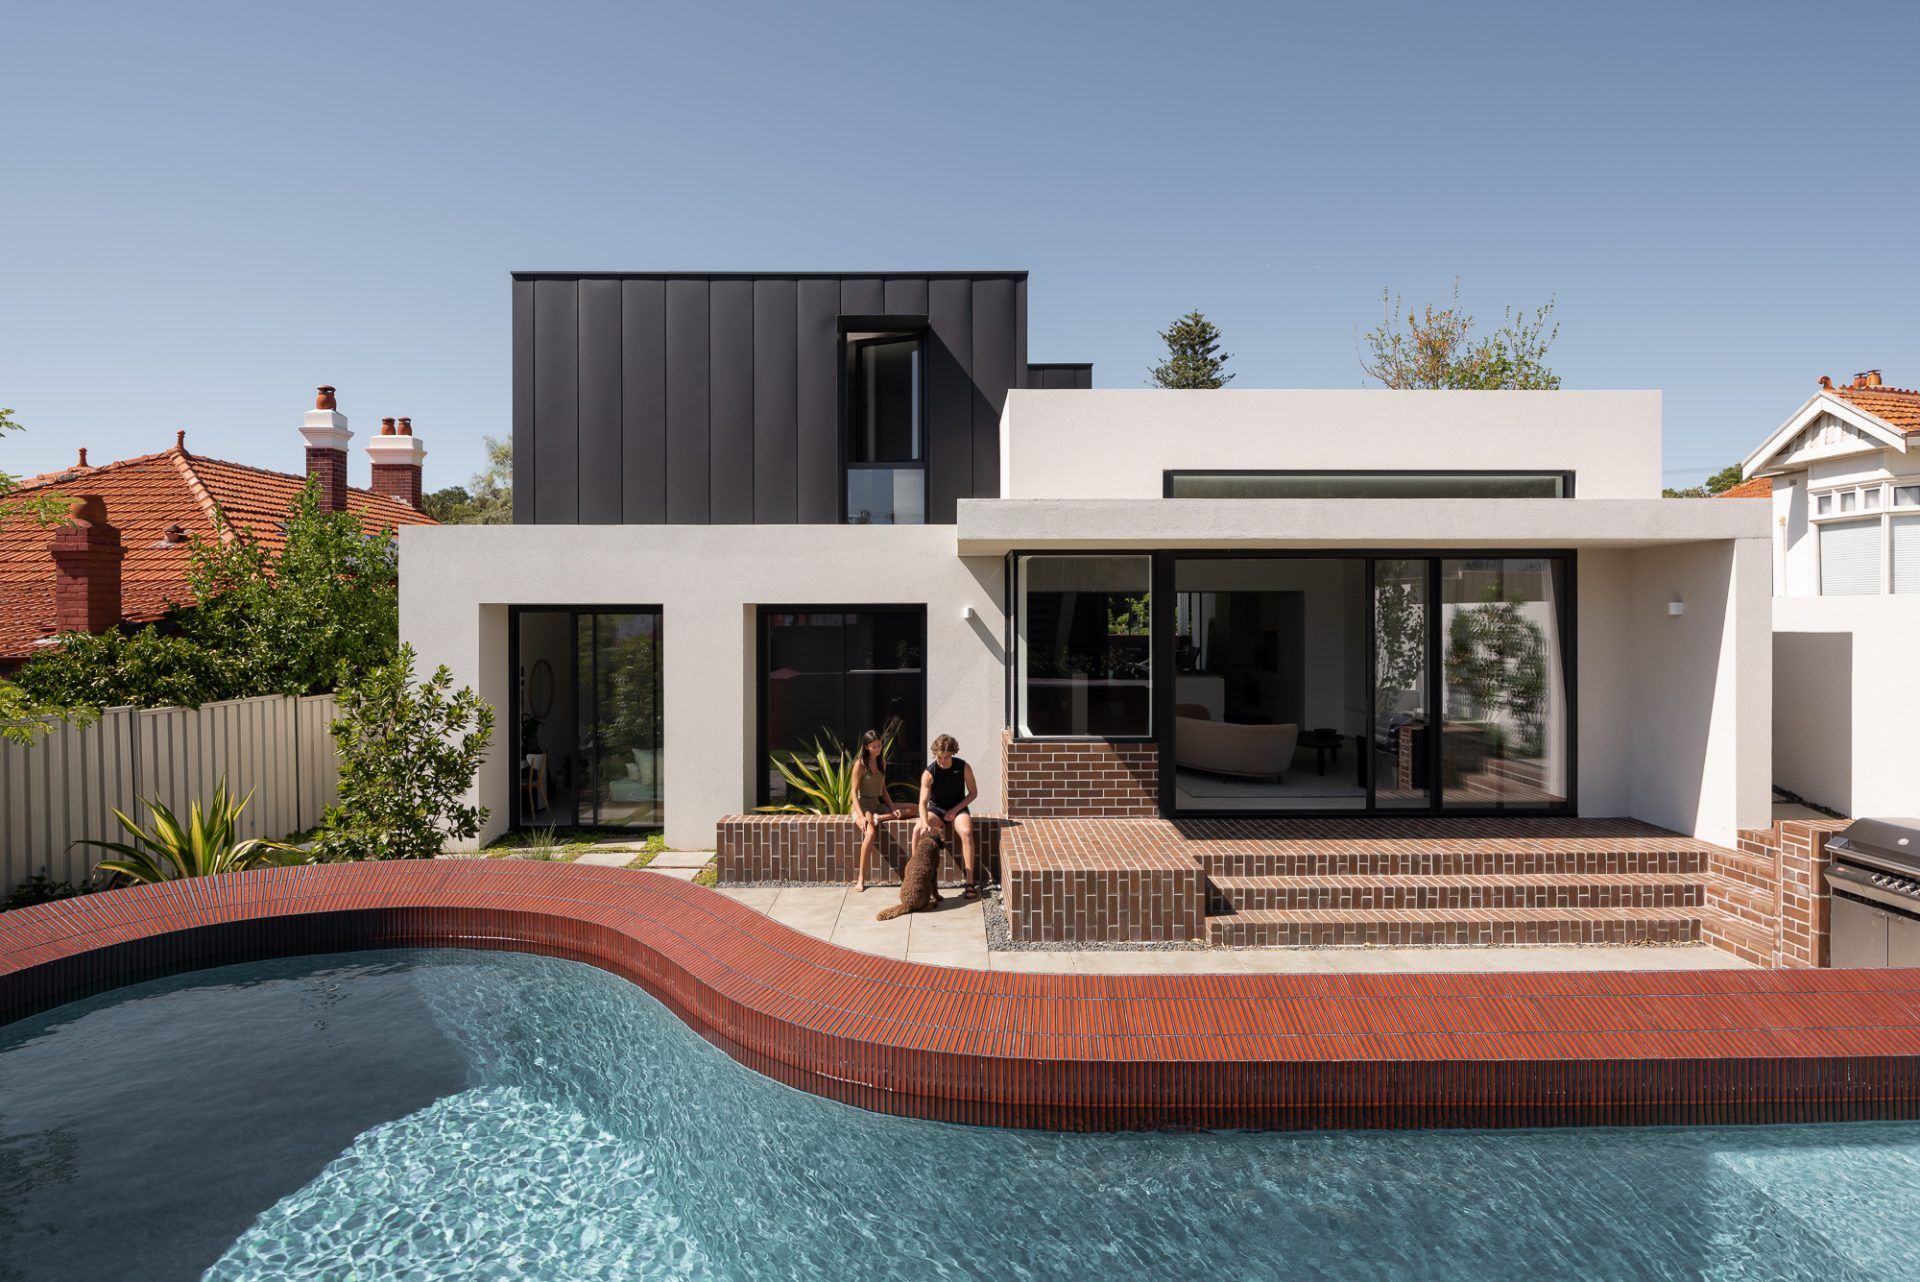 Hyde Park House by Robeson Architects. Rear facade of modern, double story home and raised pool area. Structure built from red brick, white render and the second story comprised of black metal. 